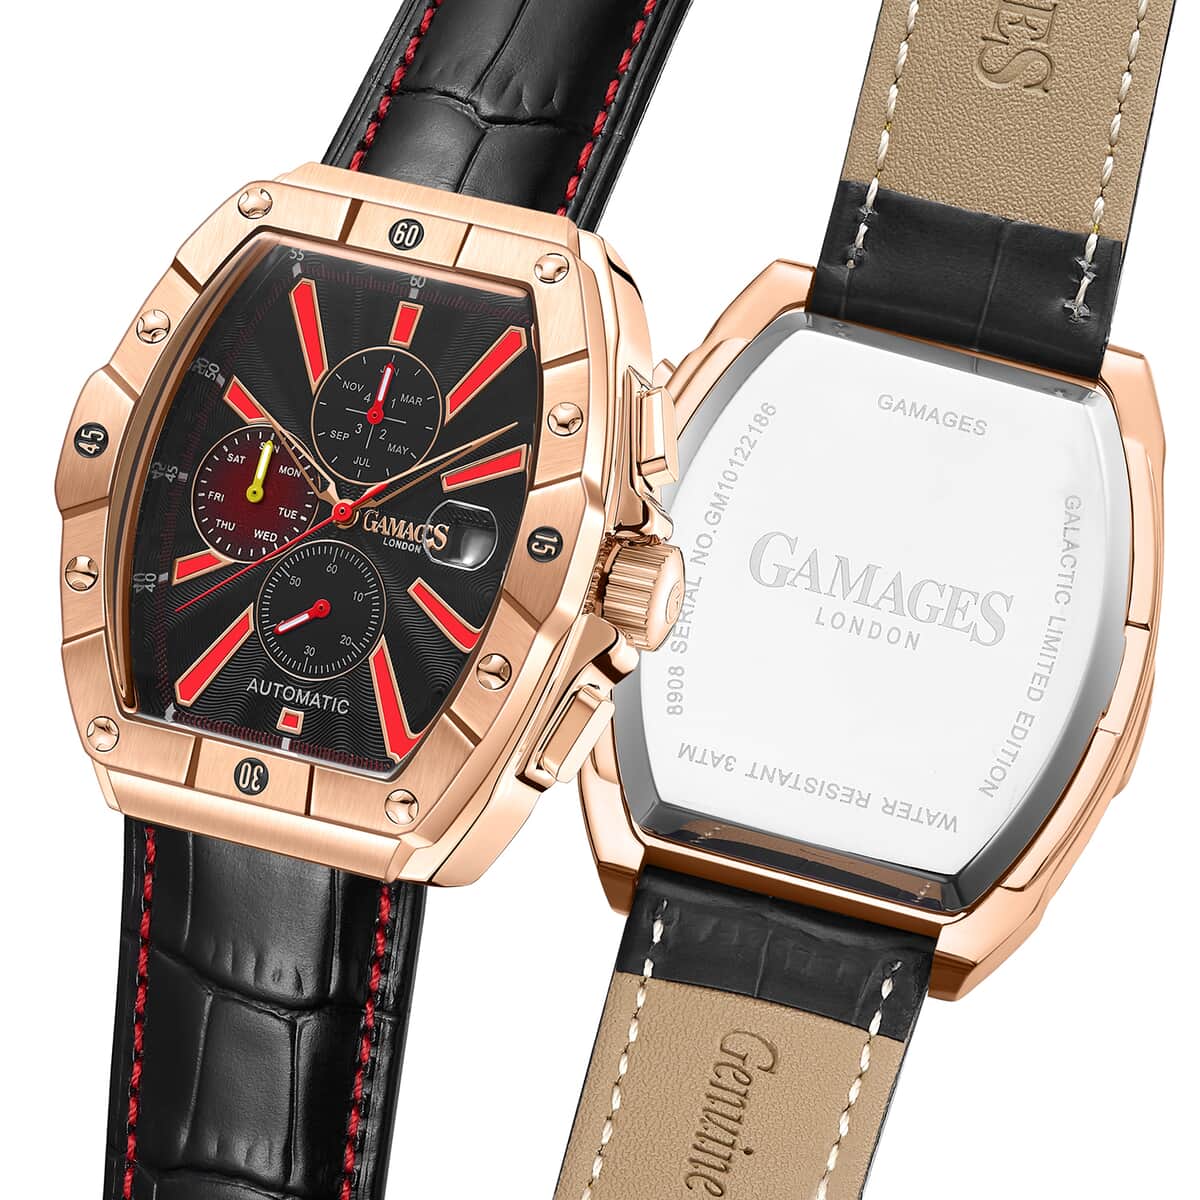 GAMAGES OF LONDON Limited Edition Hand Assembled Galactic Automatic Movement Genuine Leather Strap Watch in Rose (43mm) image number 4